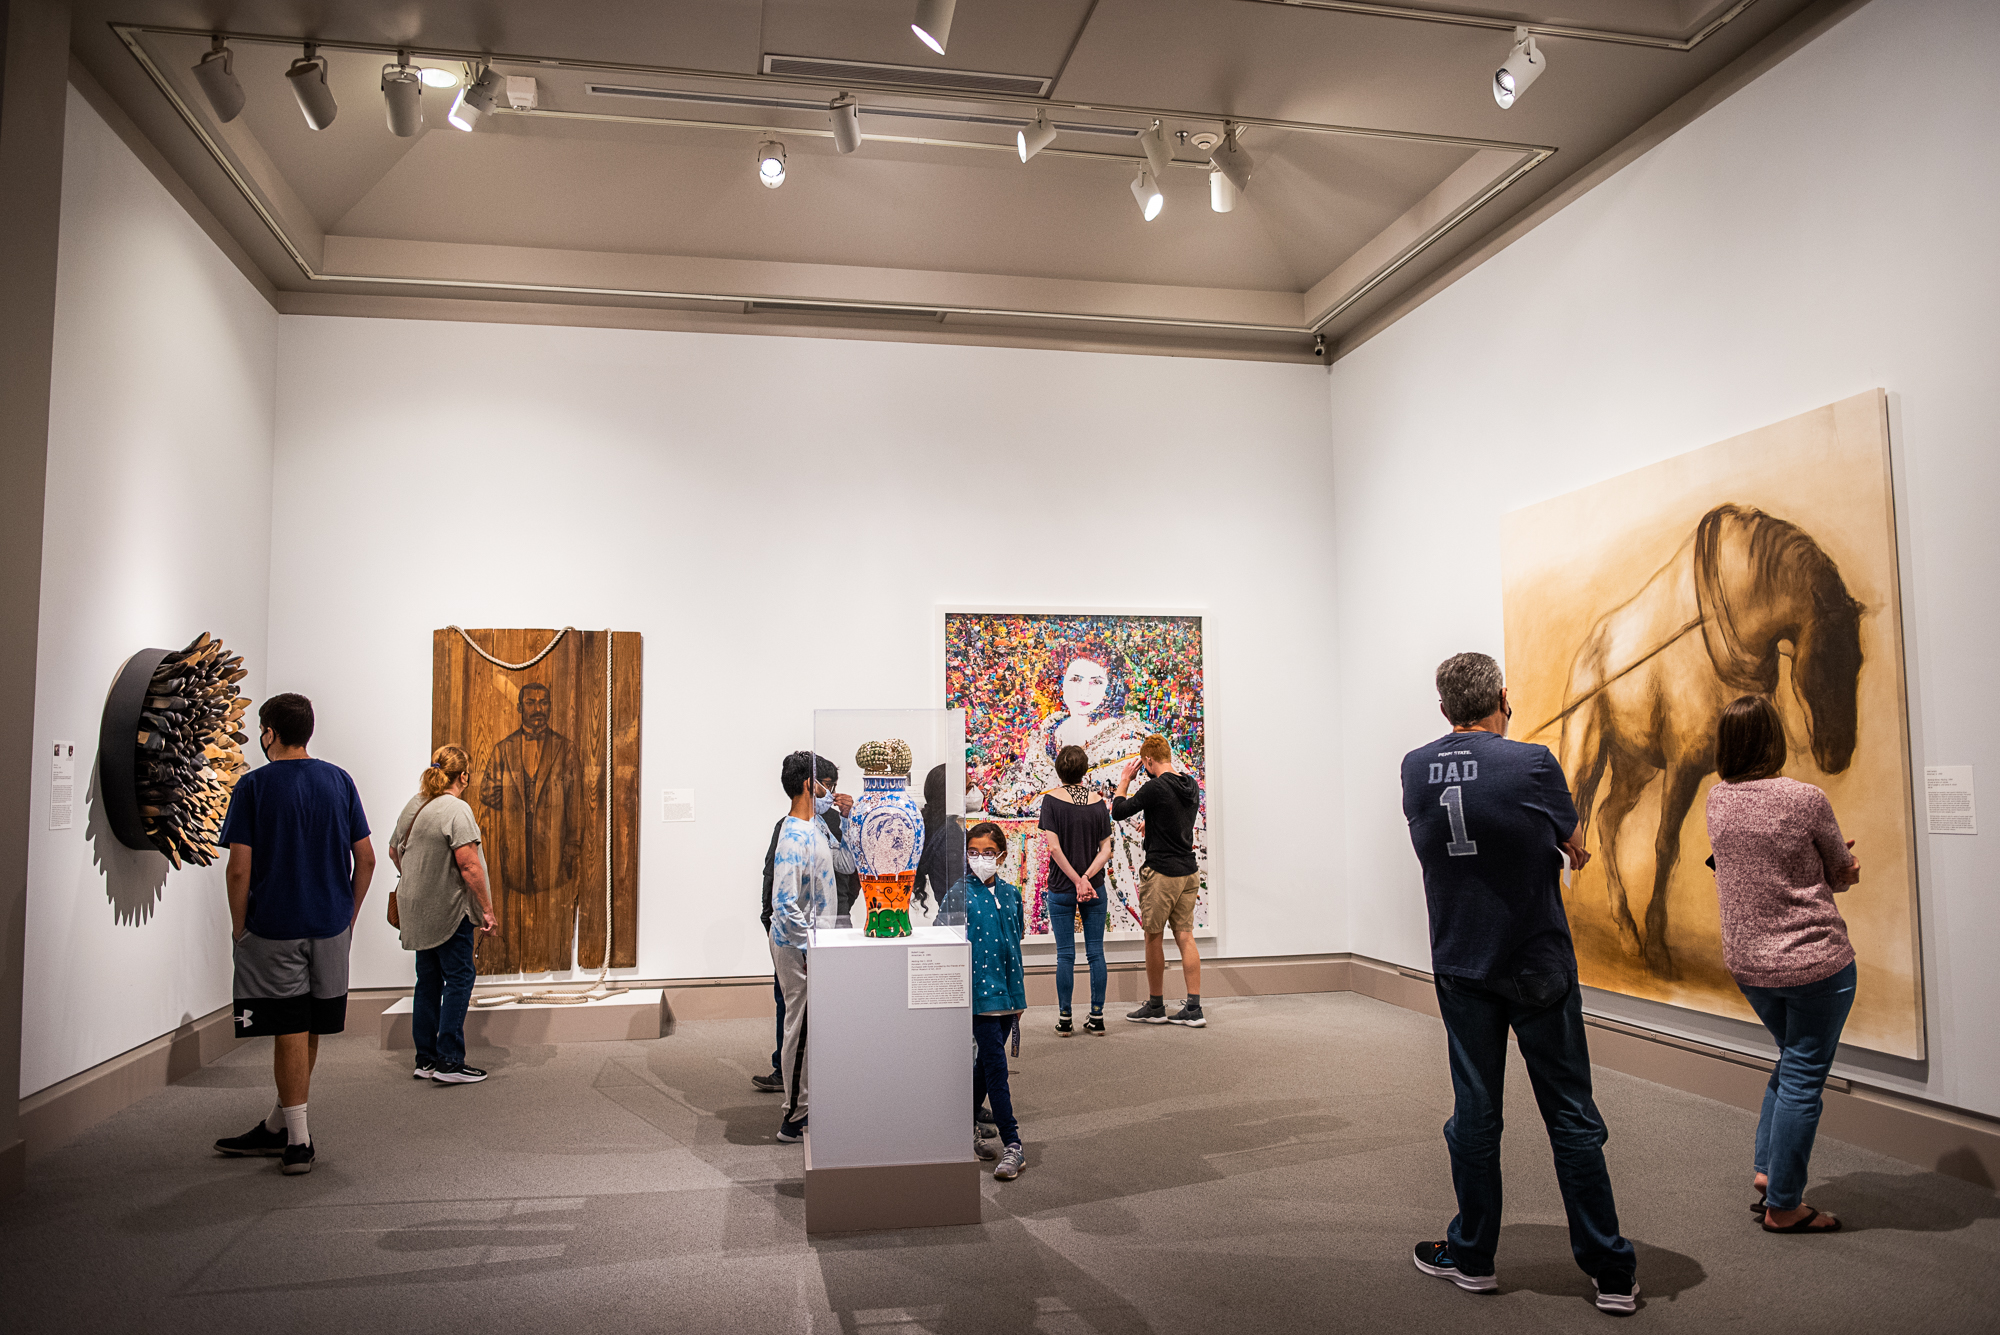 Self-guided tours in the PIncus Gallery